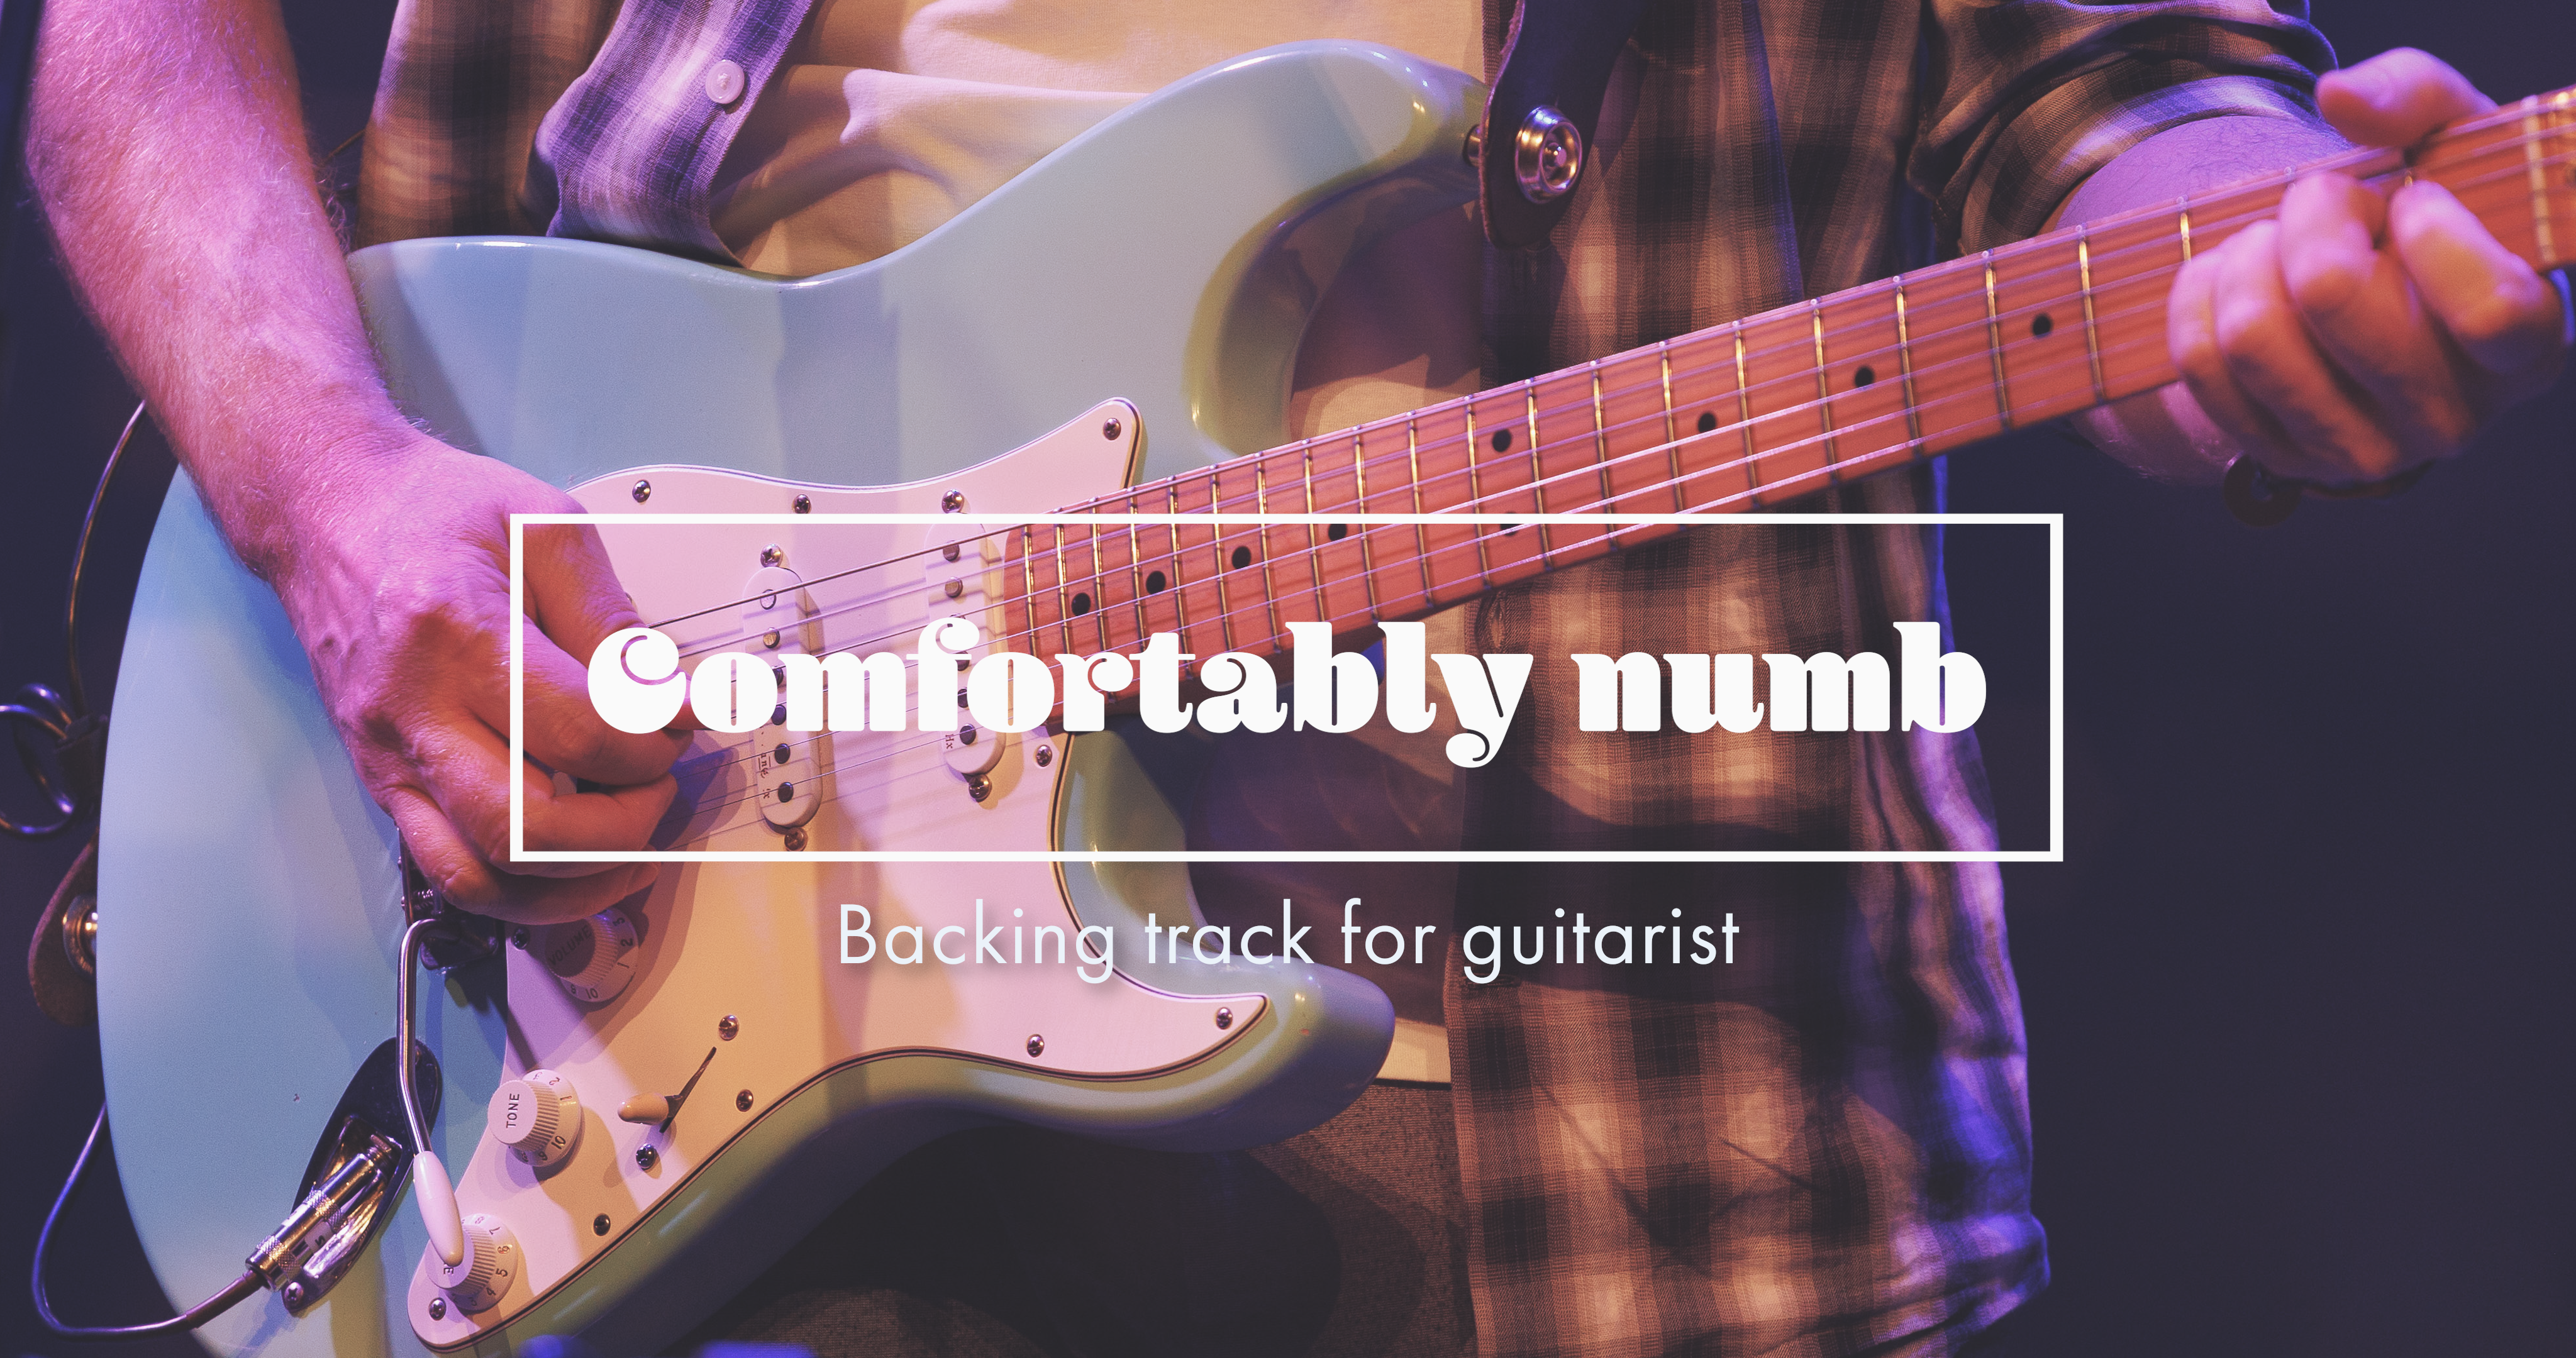 Comfortably numb - Backing track for guitarist